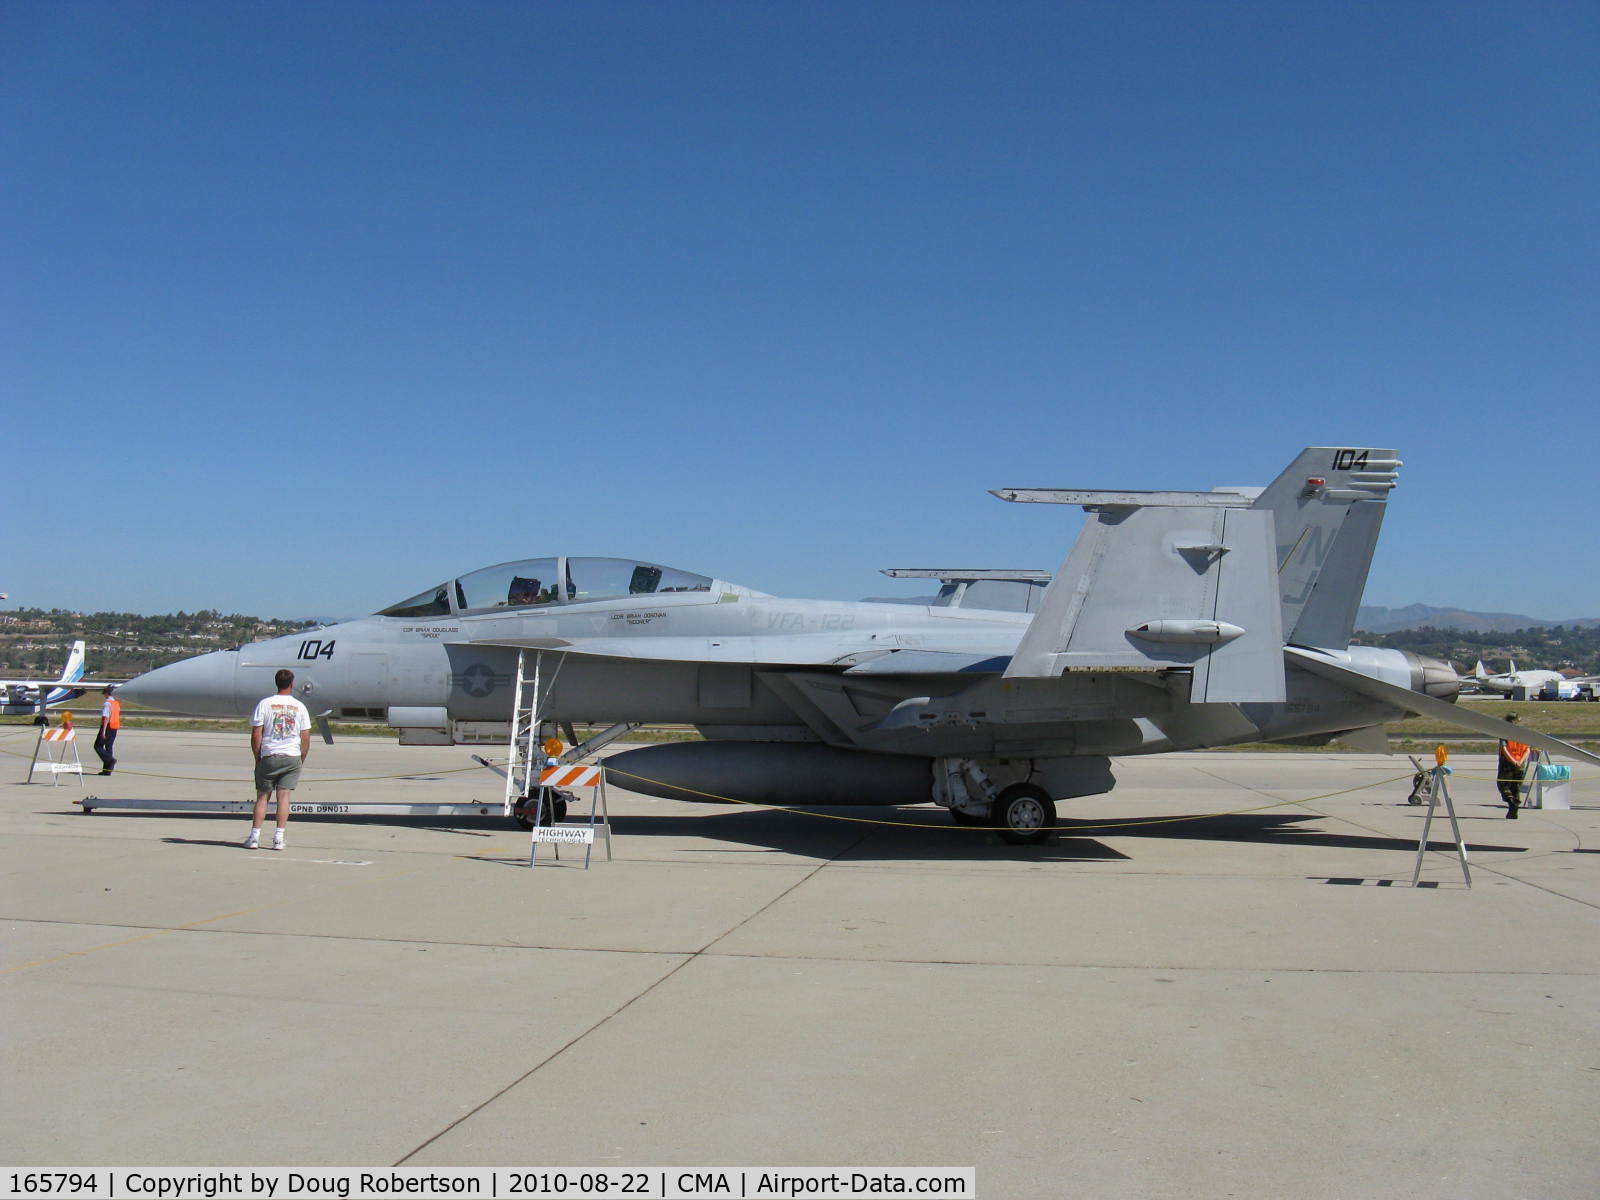 165794, Boeing F/A-18F Super Hornet C/N 1521/F020, Boeing F/A-18F SUPER HORNET, two GE F414-GE-400 Turbofans 14,000 lb t each, 22,000 lb t each with afterburning, wings folded